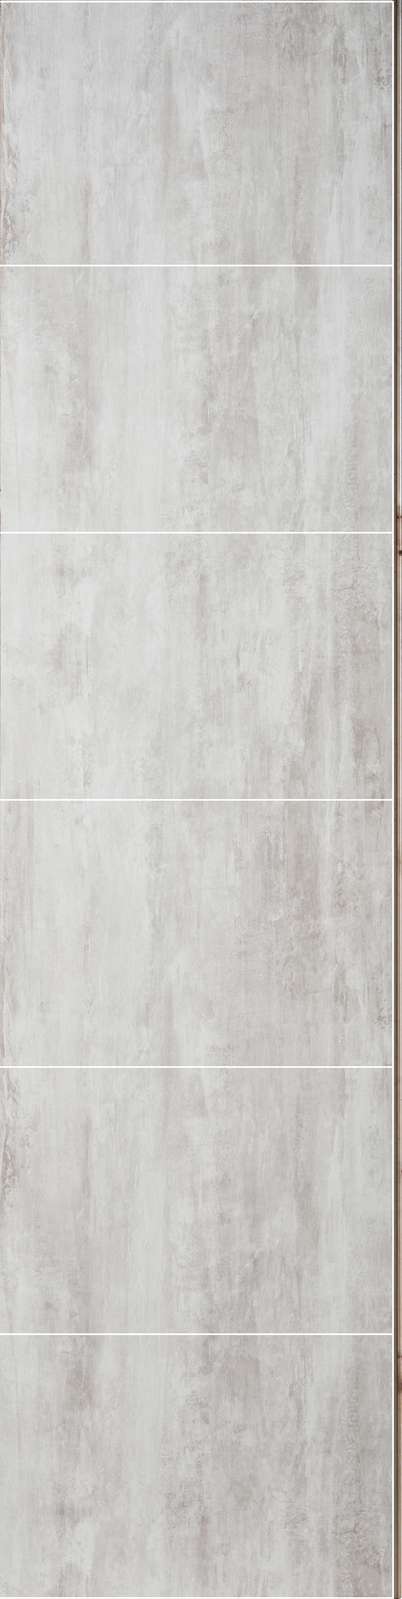 Abby Shale 24 x 16 shower and bathroom wall panels 